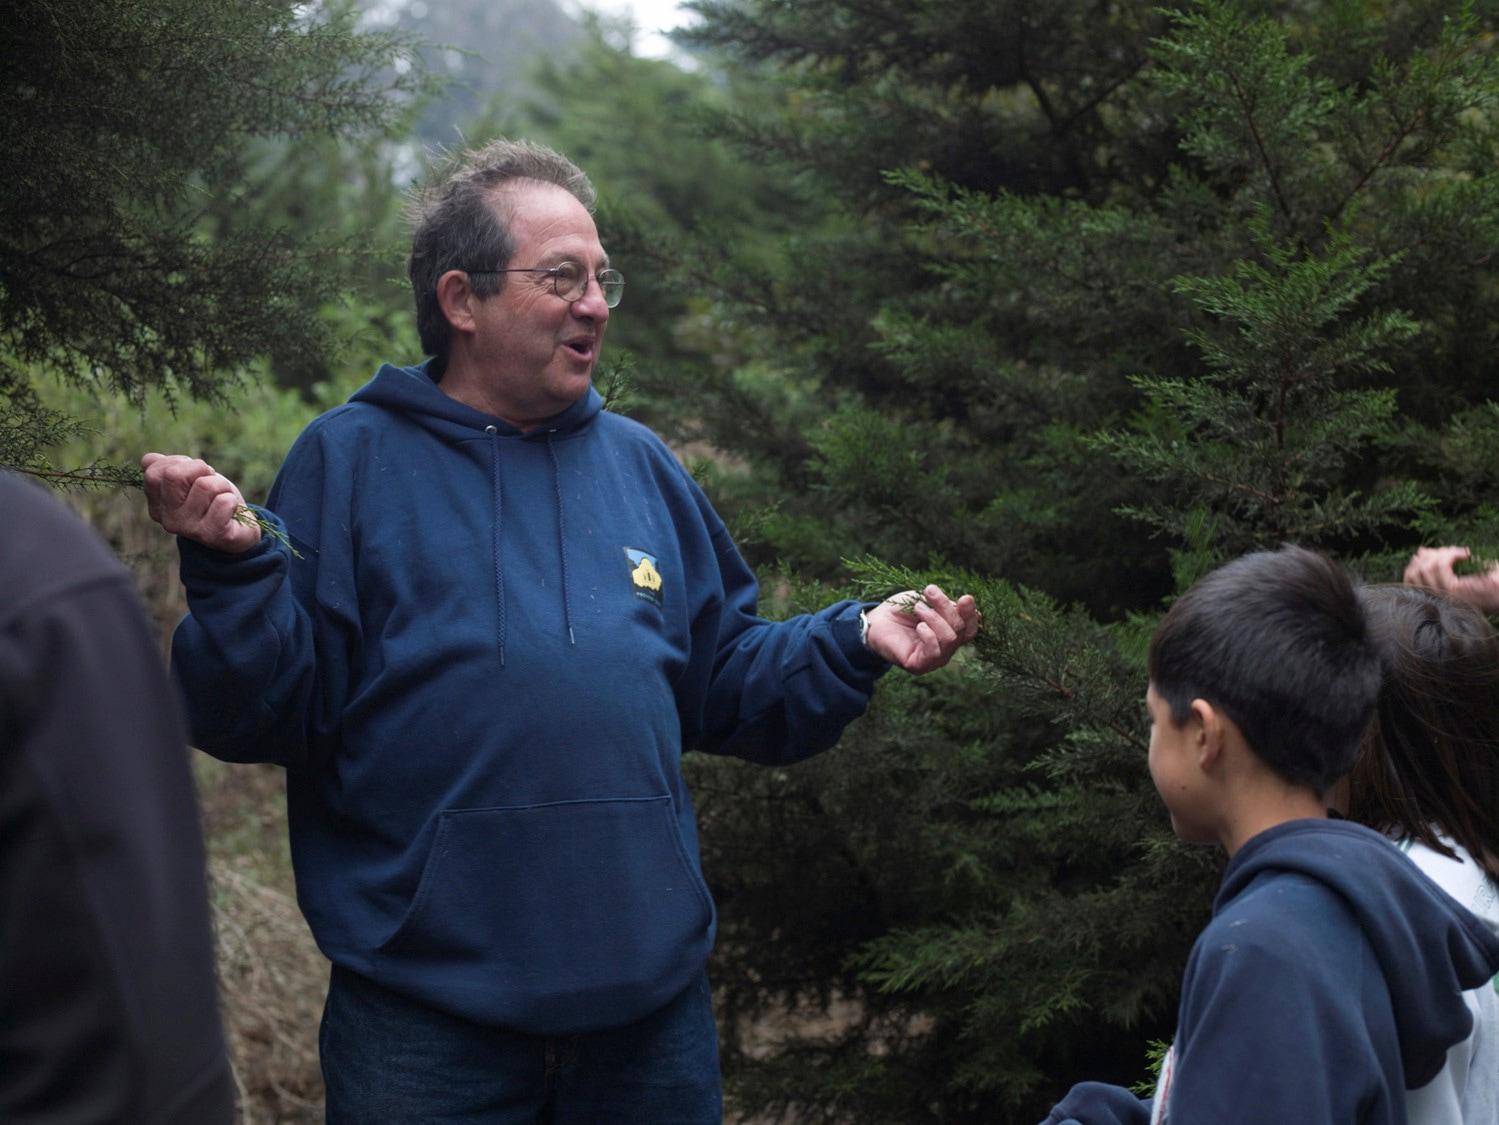 Peter leading a talk about the forest.